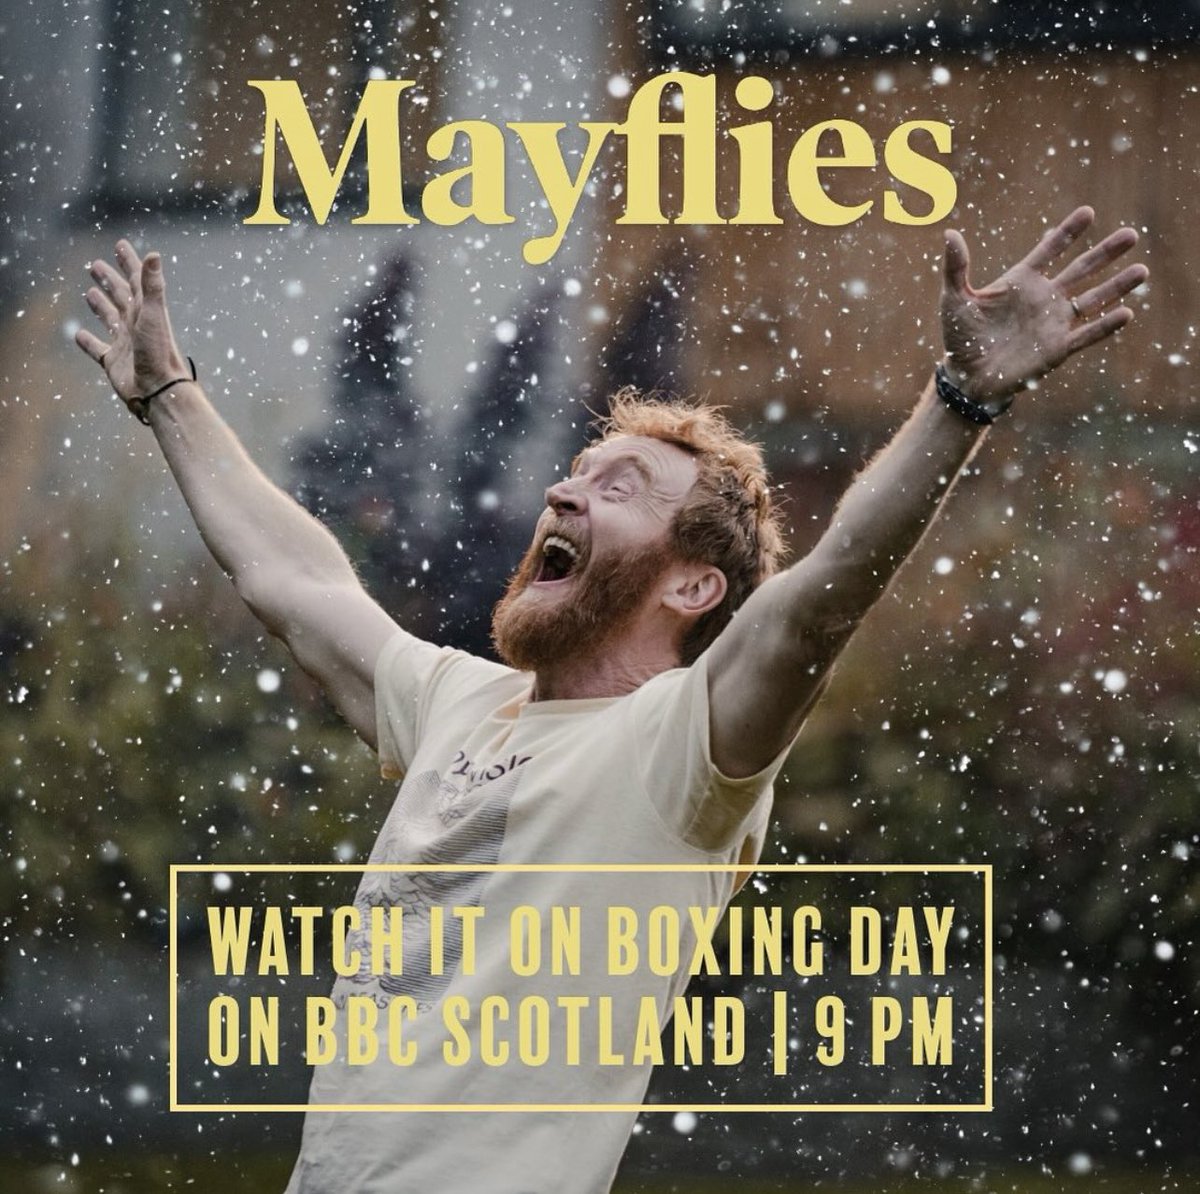 If you missed the #Bafta winning #Mayflies first time round, there’s another chance to see it on Boxing Day. @BAFTAScotland @BAFTA @bbc & @amazonprime @SynchronicityF 💛